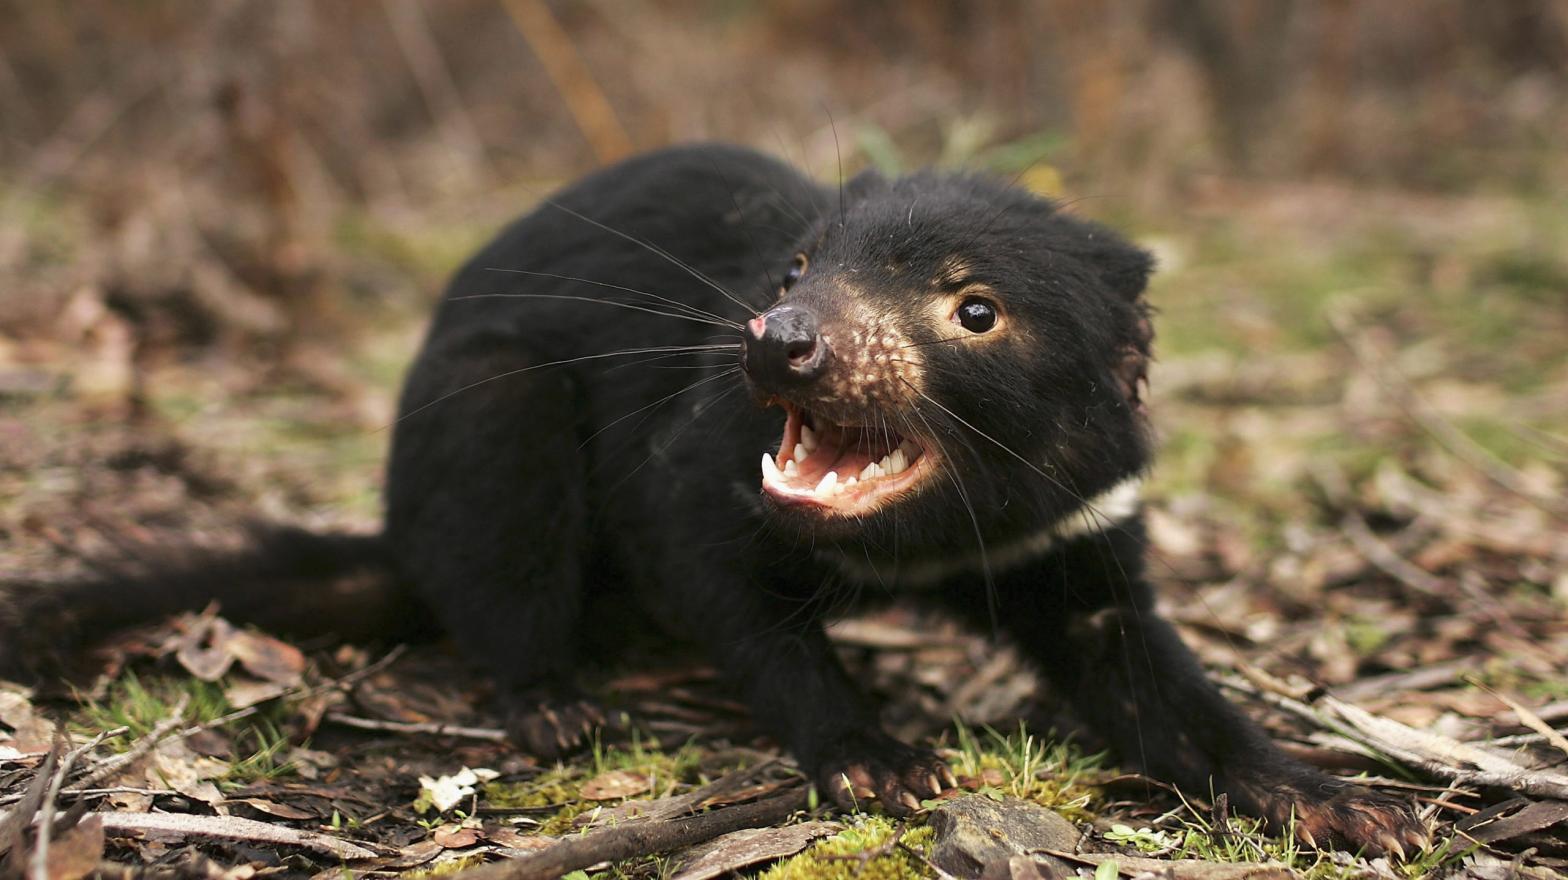 A Tasmanian Devil is released in the wild after being captured to check for signs of the Devil Facial Tumour Disease. (Photo: Adam Pretty, Getty Images)